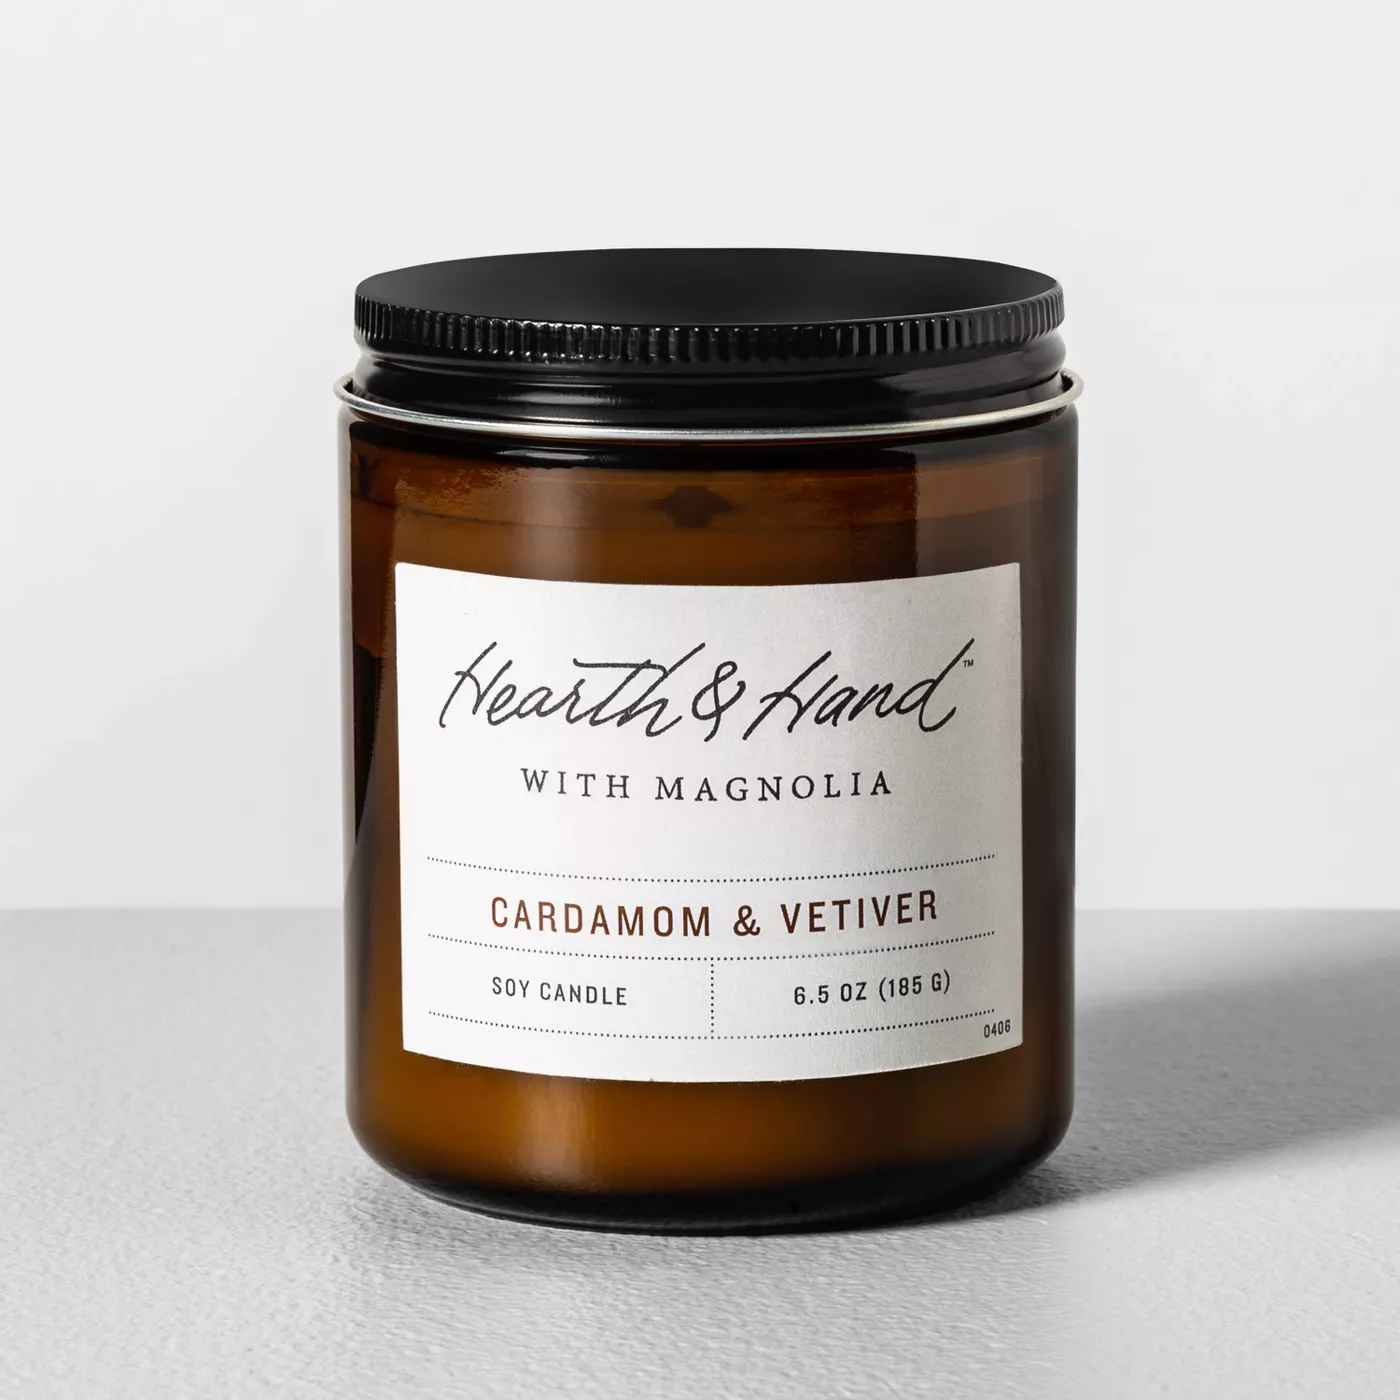 Glass Candle Cardamom & Vetiver - Hearth & Hand™ with Magnolia - image 1 of 2